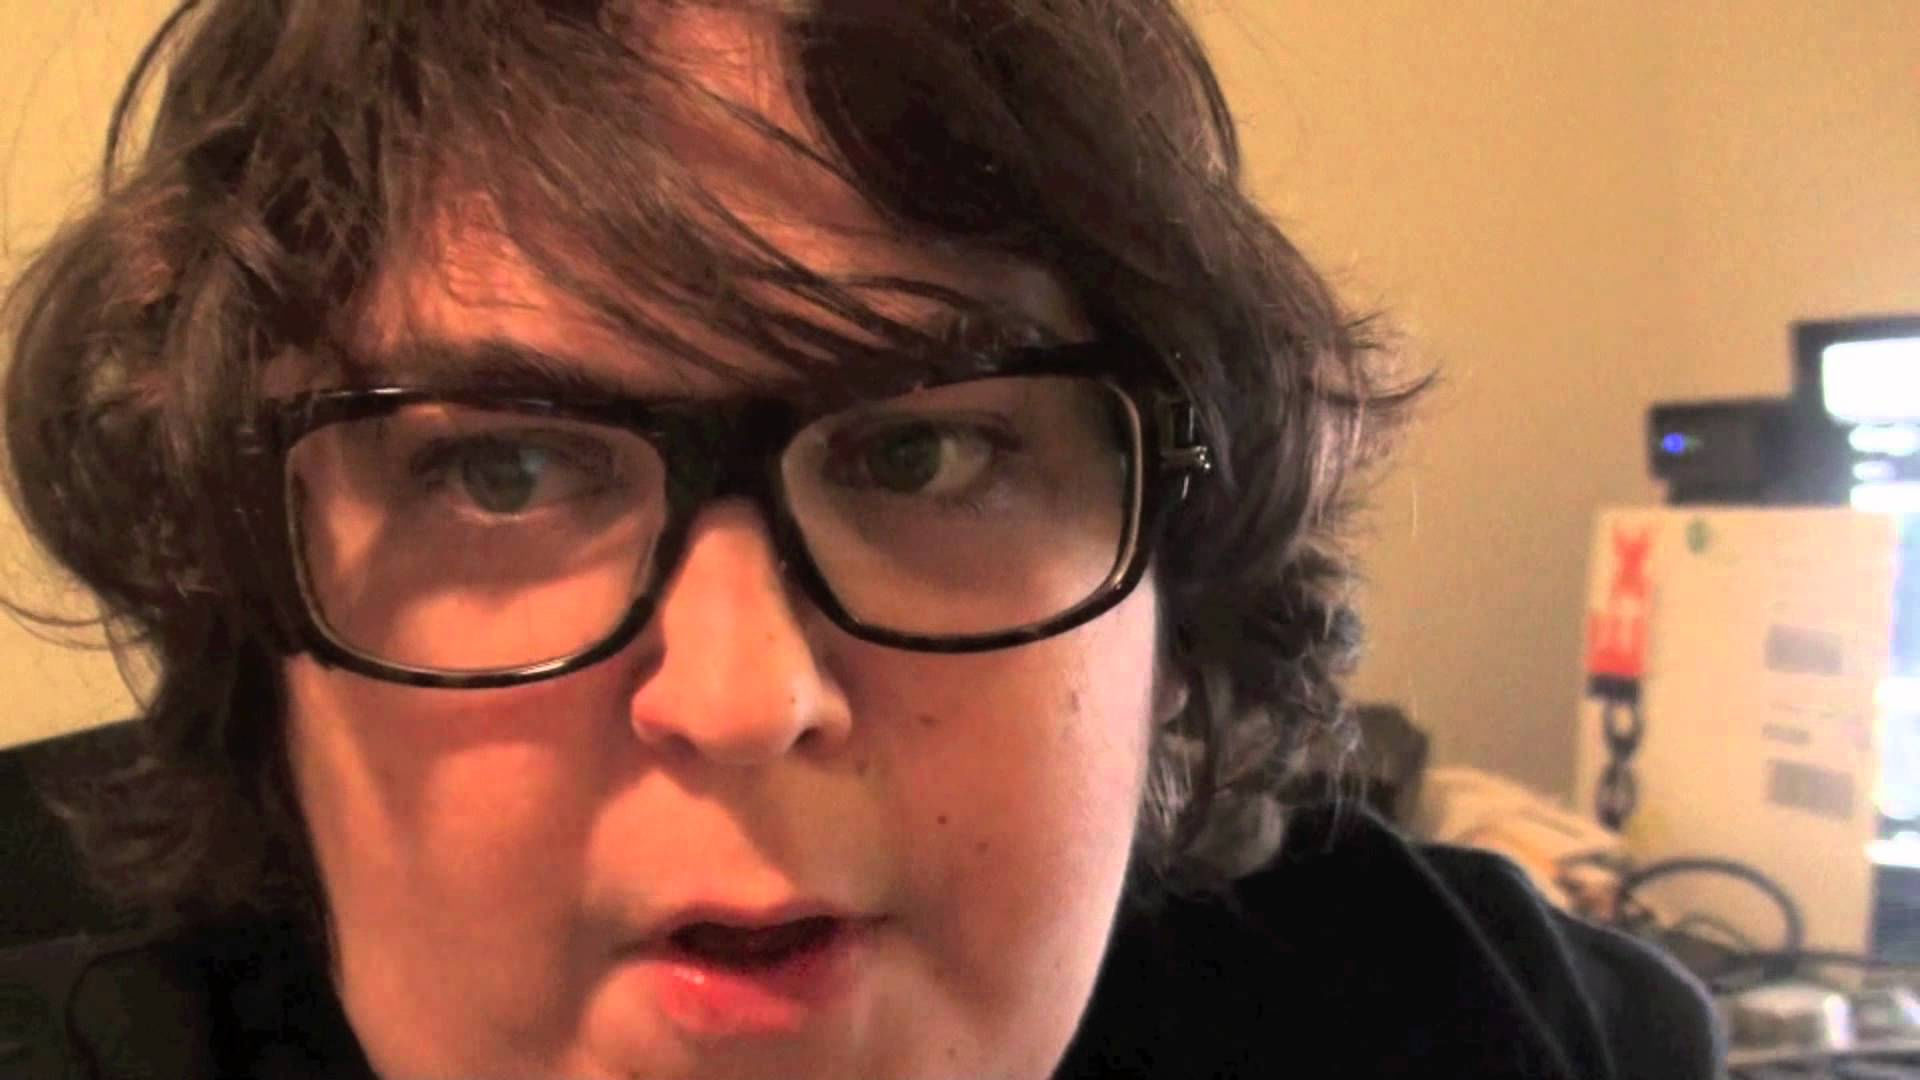 The Andy Milonakis Show Image #151721 TVmaze.